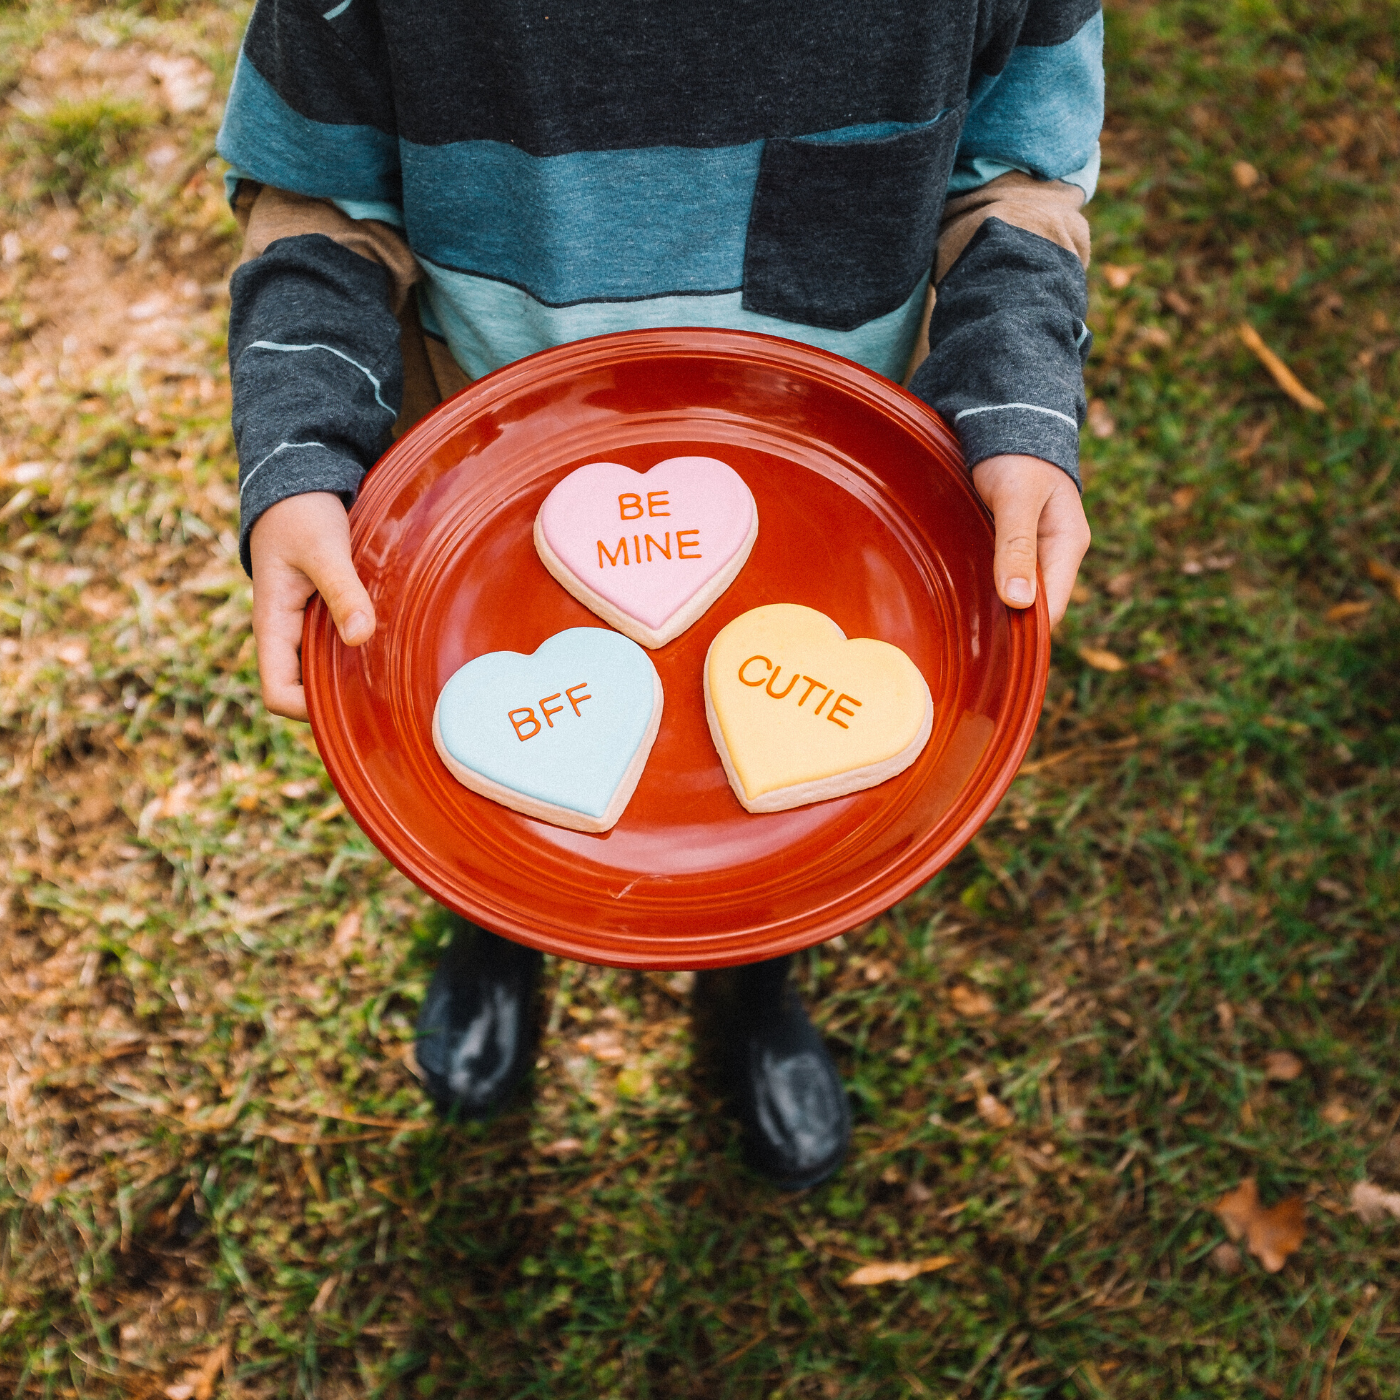 Lifestyle image of 3 heart shaped cookies that each say &quot;be mine&quot;, &quot;bff&quot;, and &quot;cutie&quot;